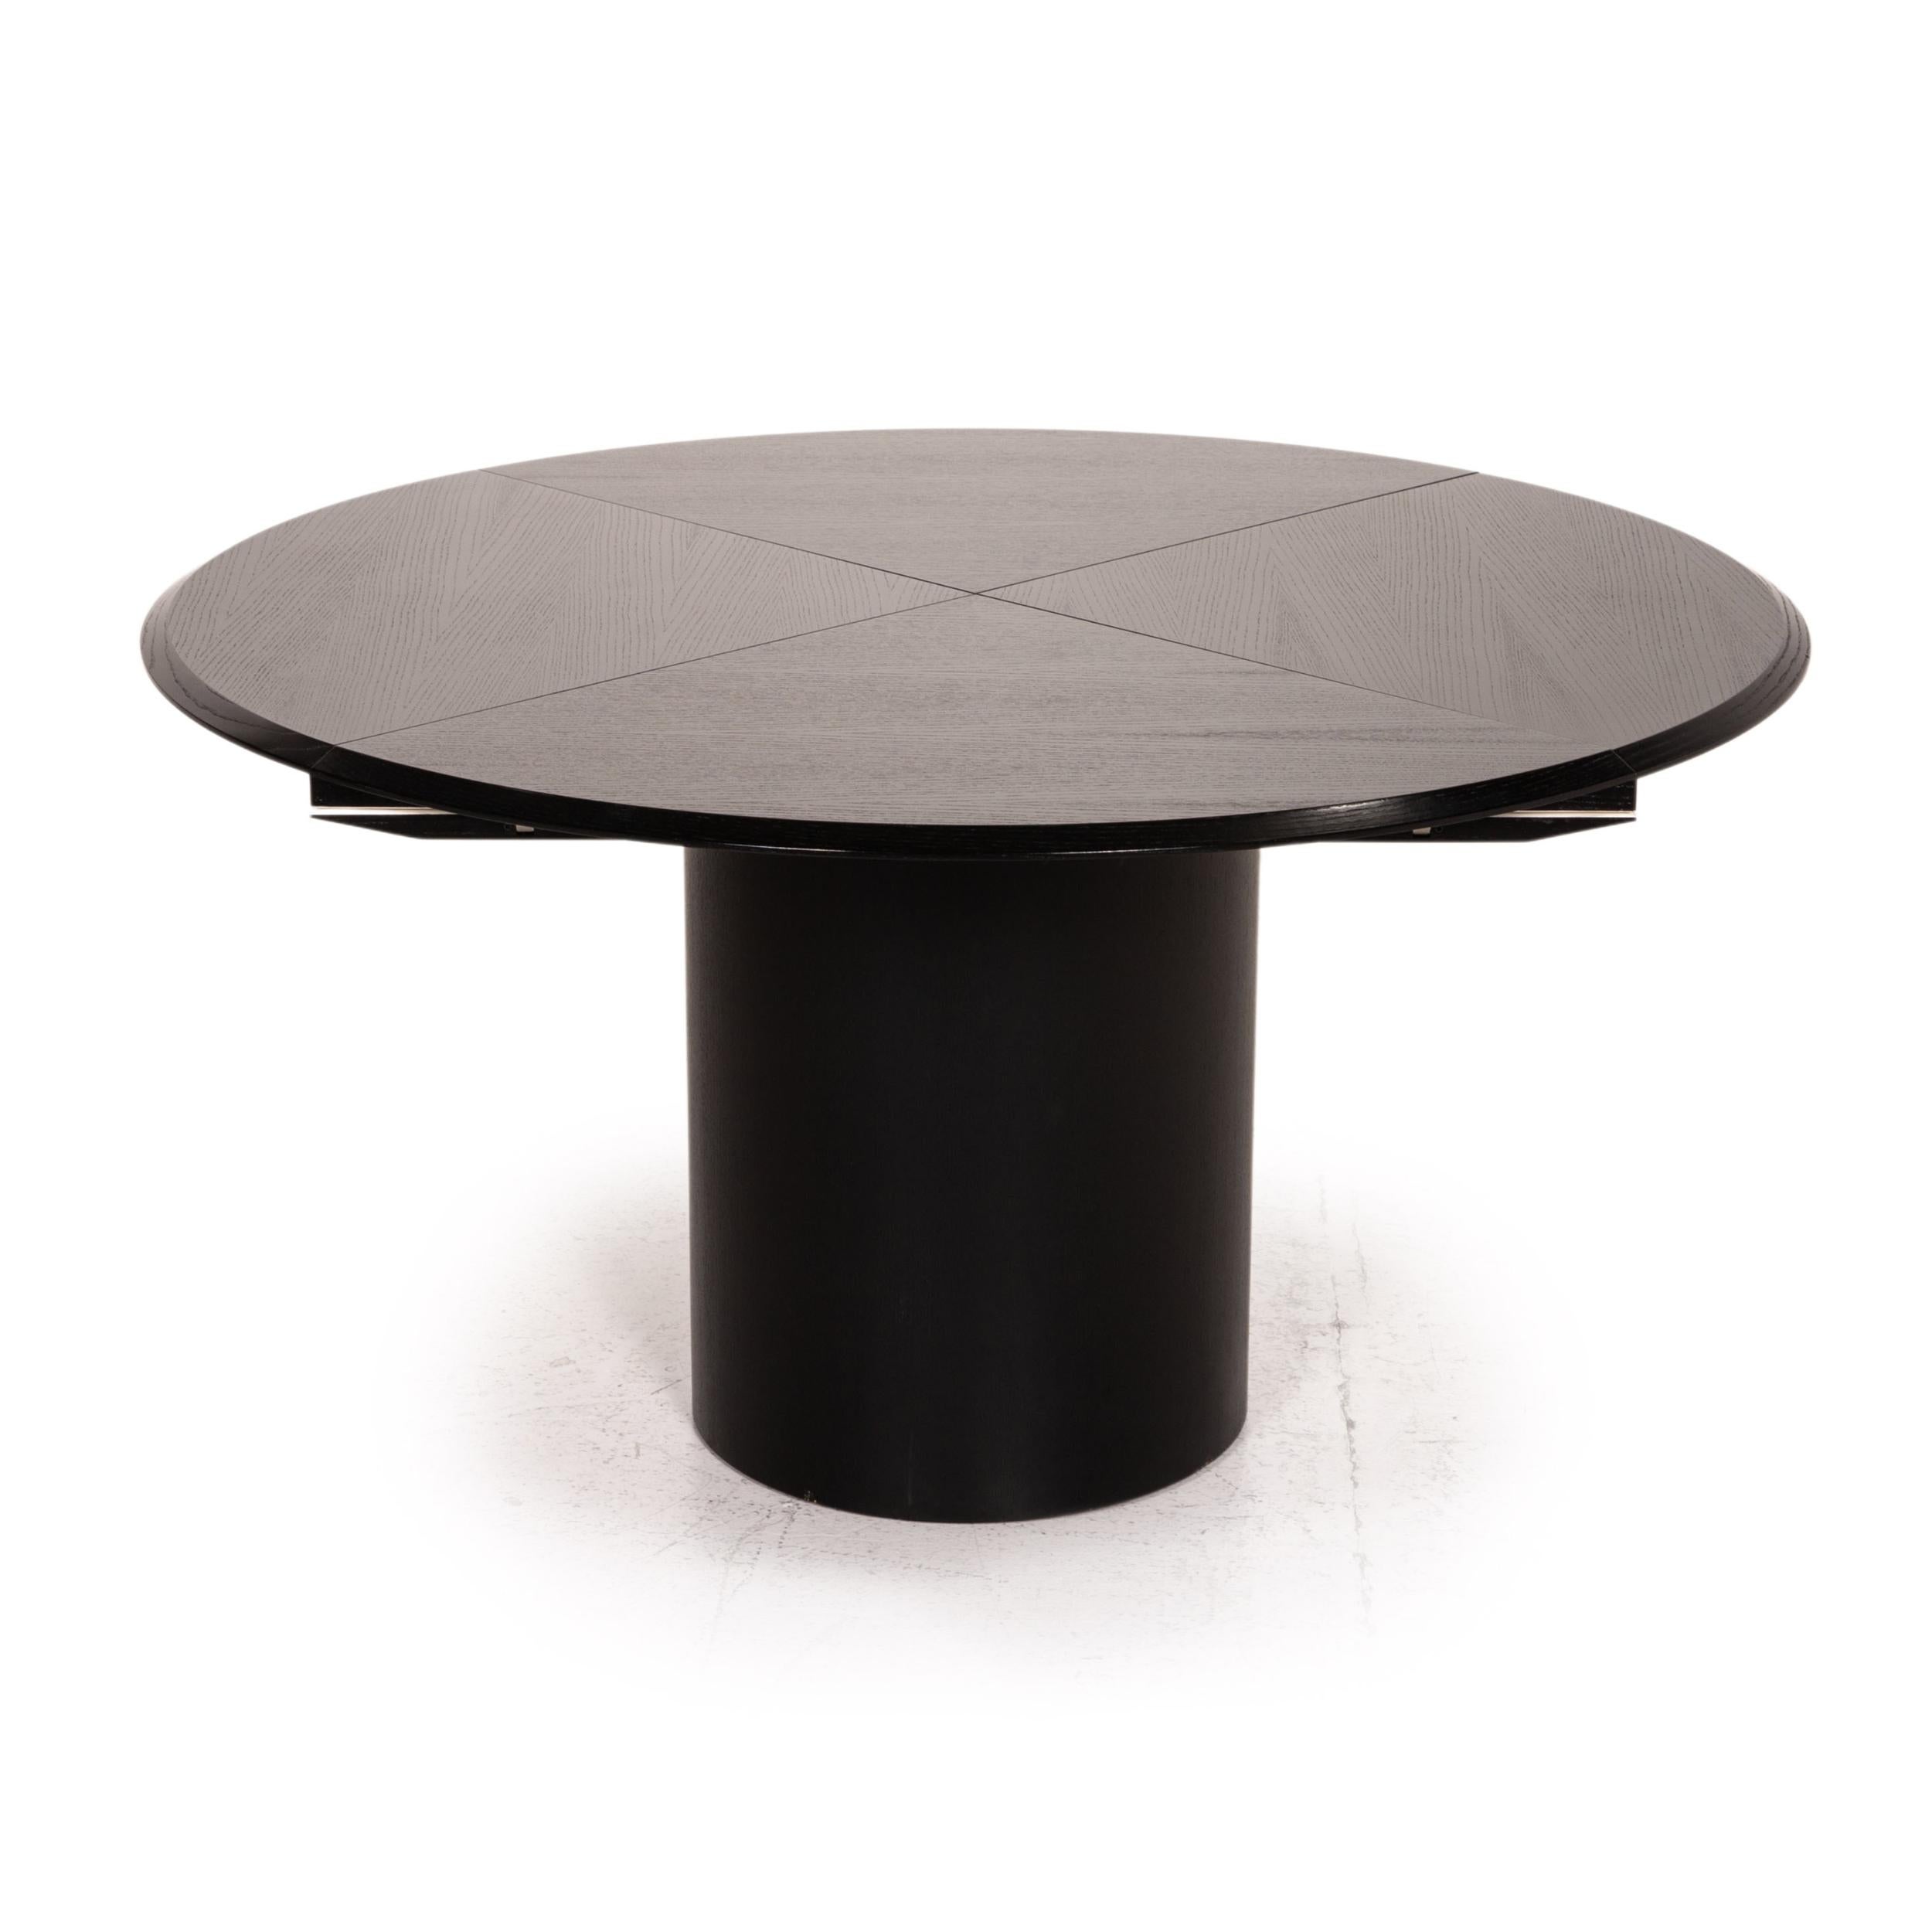 Rosenthal Quadrondo Dining Table Round Black and White Foldable Function Square 1